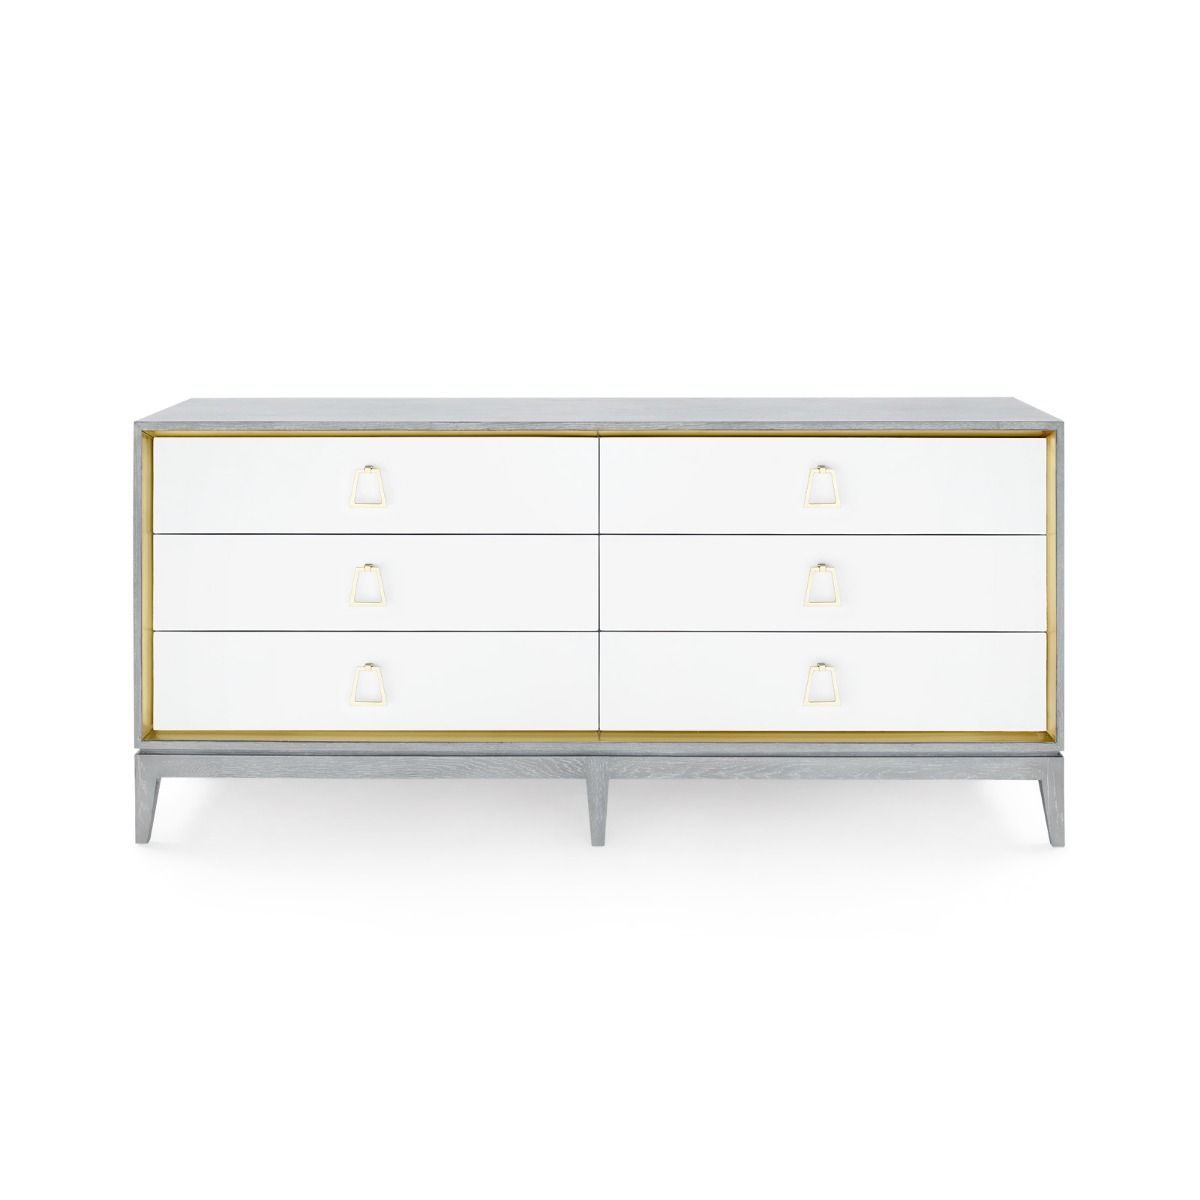 Load image into Gallery viewer, Cameron Extra Large 6-Drawer, Gray Drawer Bungalow 5     Four Hands, Burke Decor, Mid Century Modern Furniture, Old Bones Furniture Company, Old Bones Co, Modern Mid Century, Designer Furniture, https://www.oldbonesco.com/
